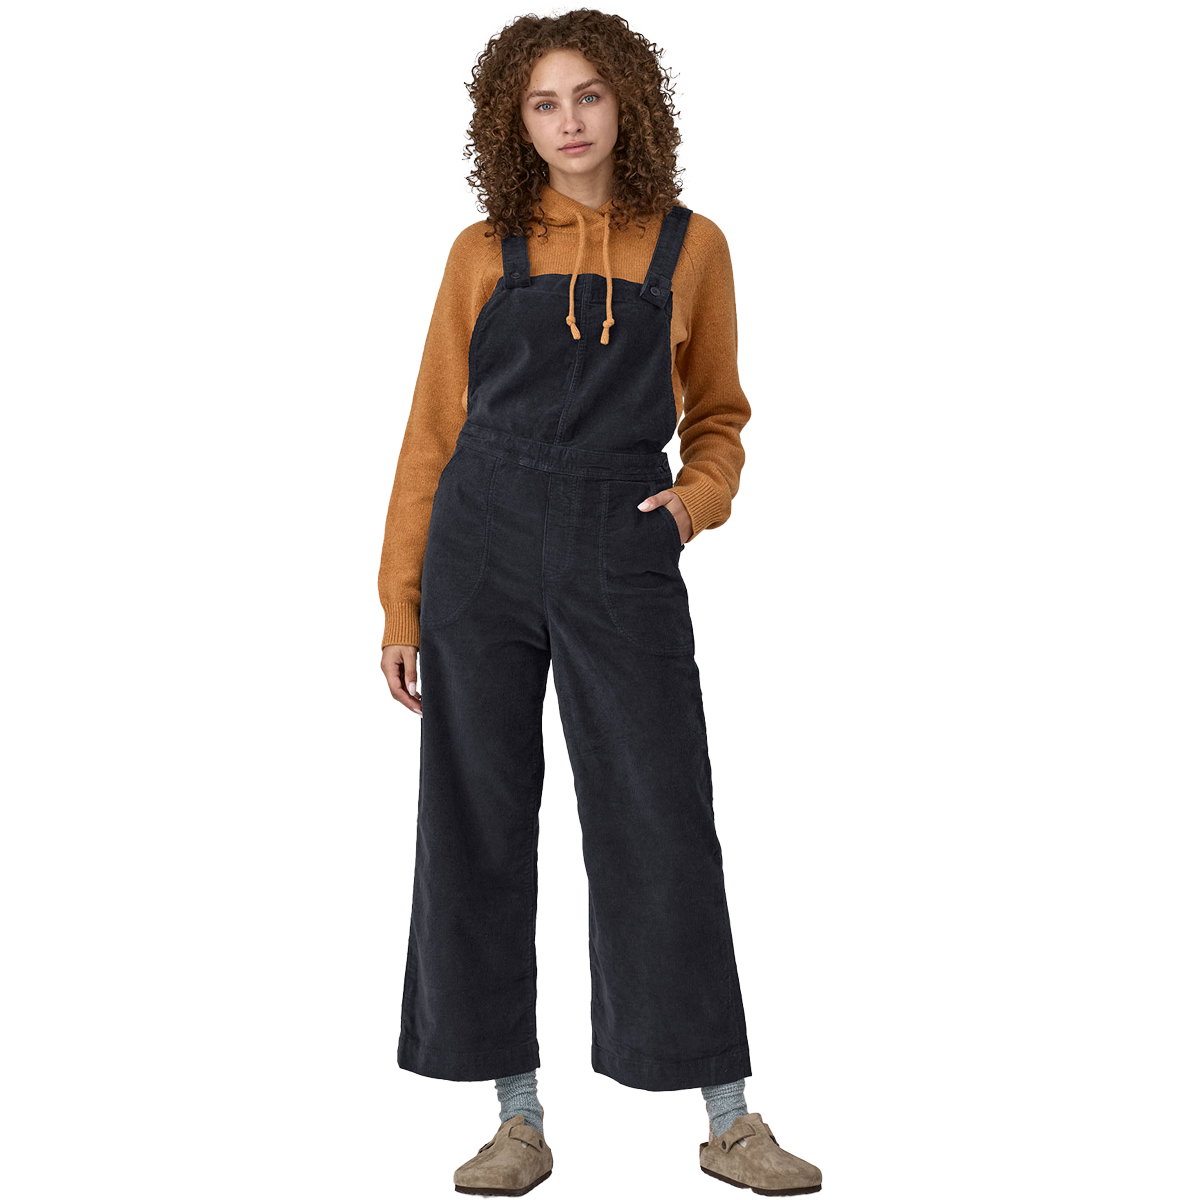 Women's Stand Up Cropped Corduroy Overalls alternate view